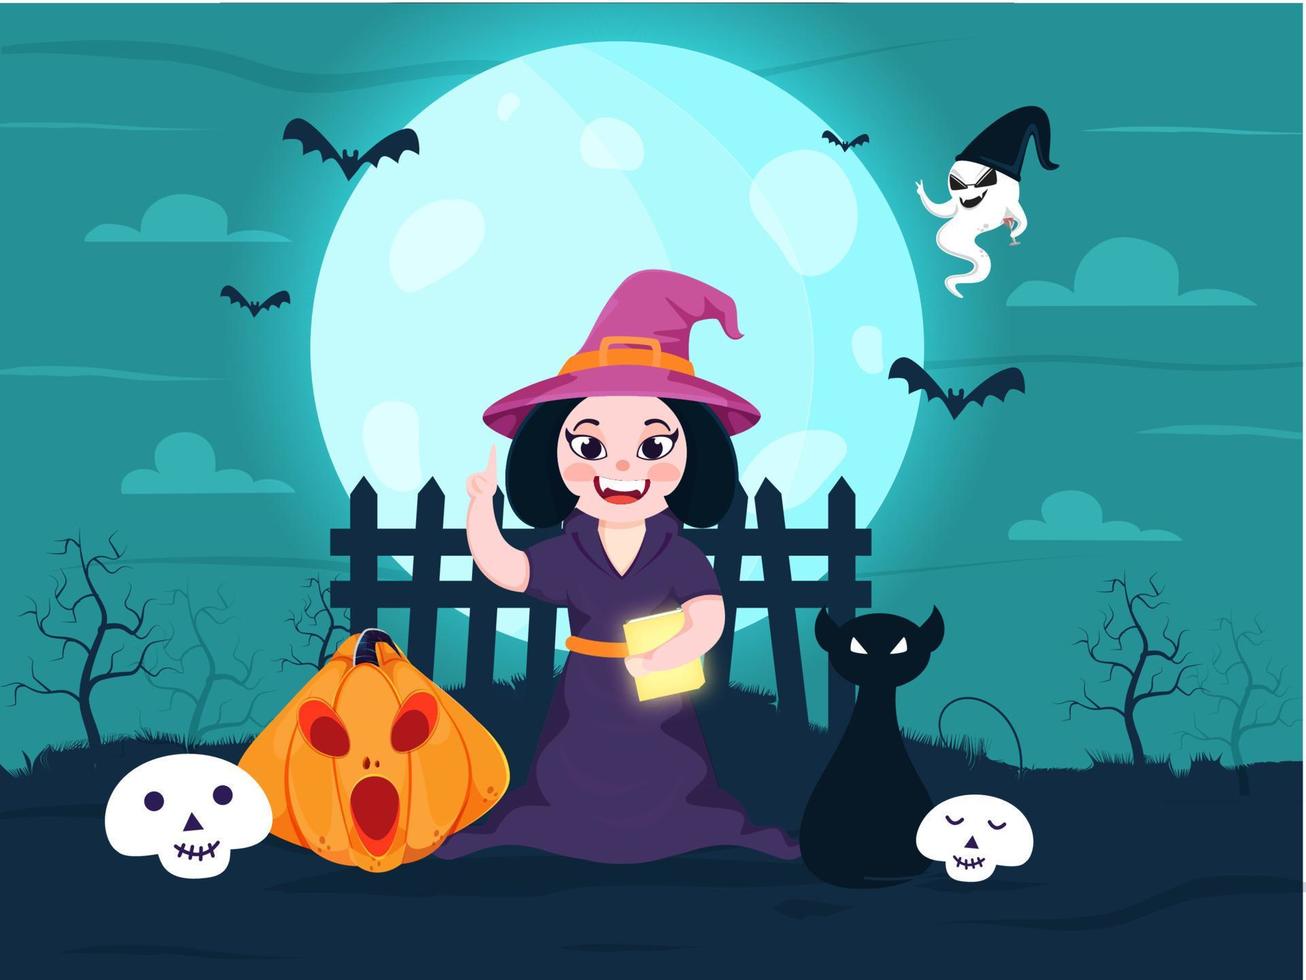 Cheerful Witch Holding Book with Point Index Finger, Jack-O-Lantern, Skulls, Scary Cat, Cartoon Ghost and Bats Fly on Full Moon Teal Background. vector